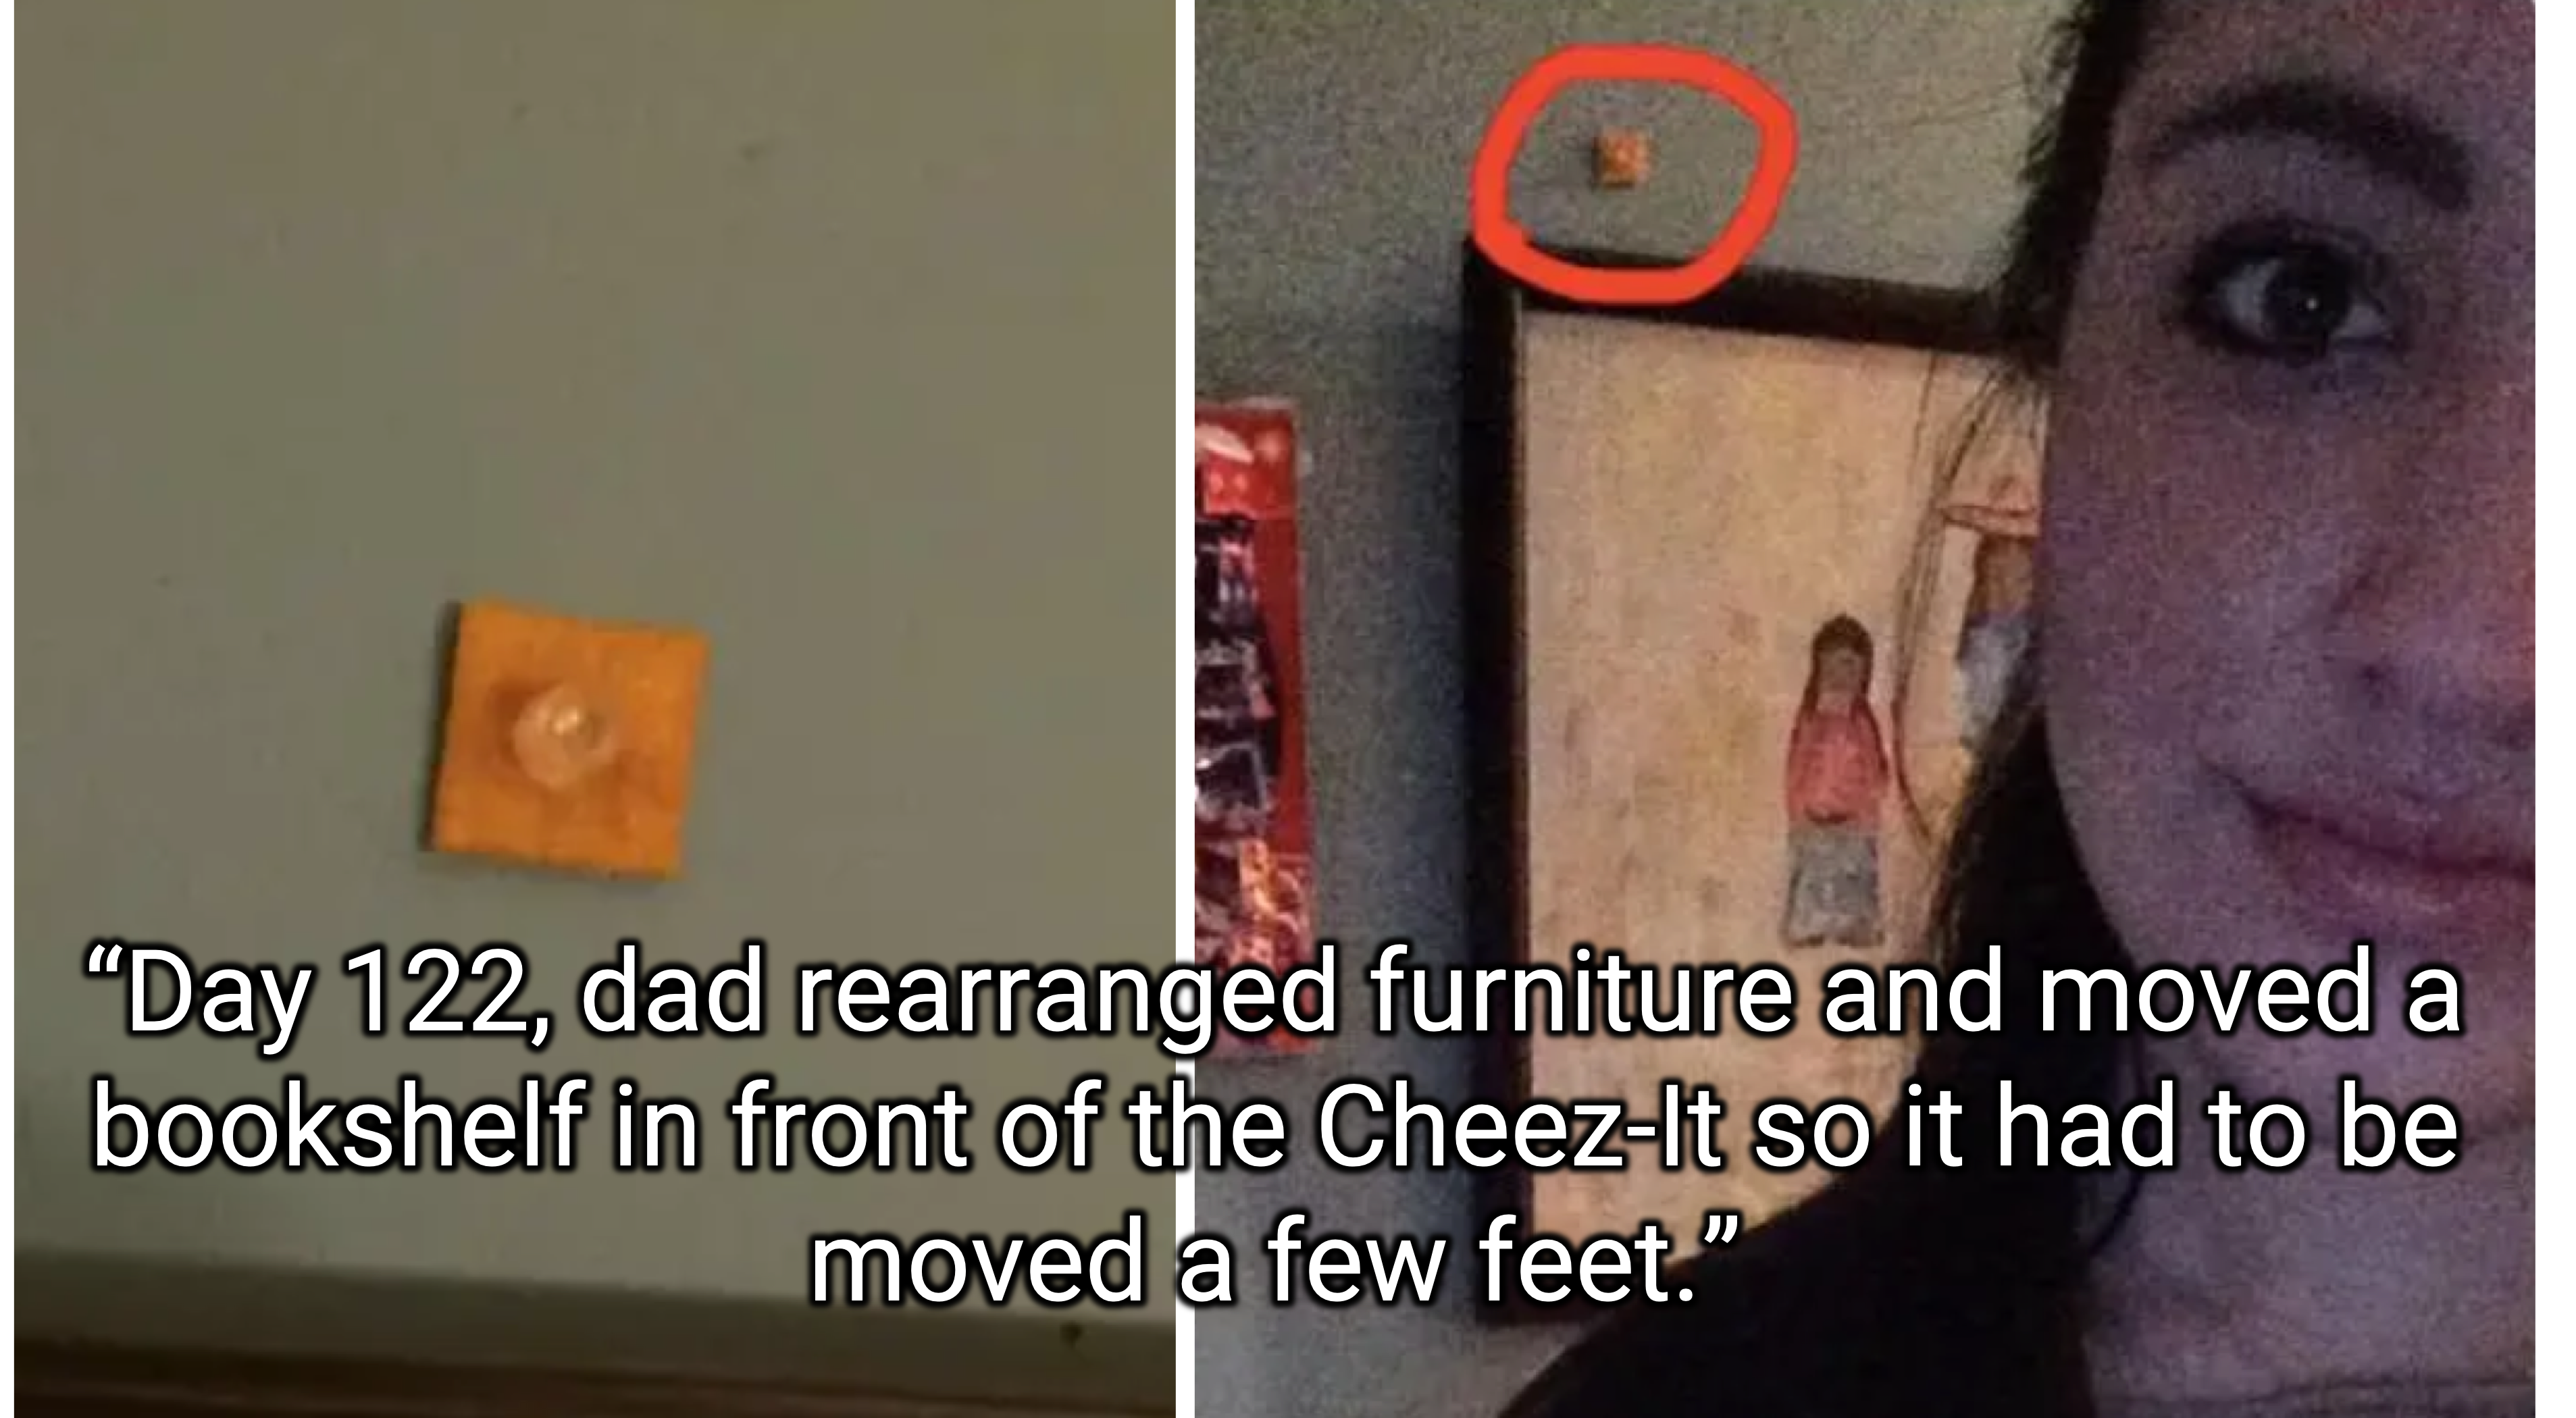 Daughter Sticks Cheez-It To Dad's Wall—Goes Unnoticed for 4 Years